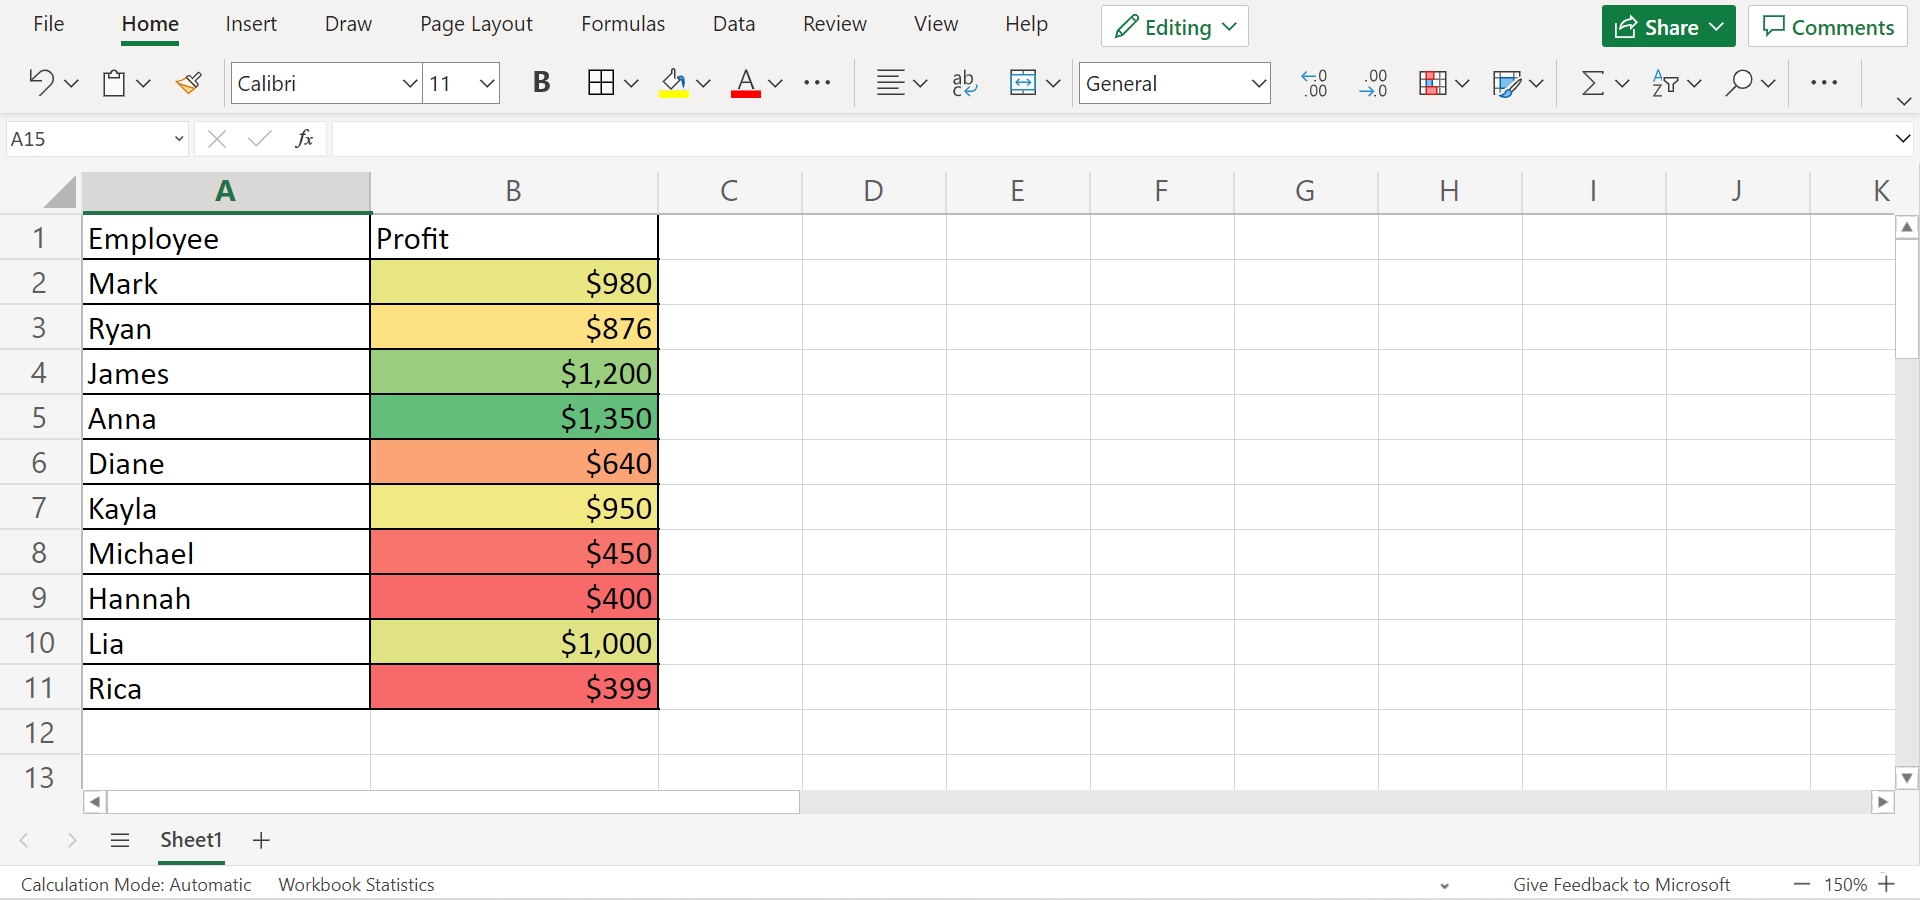 Apply Different Types of Conditional Formatting in Excel